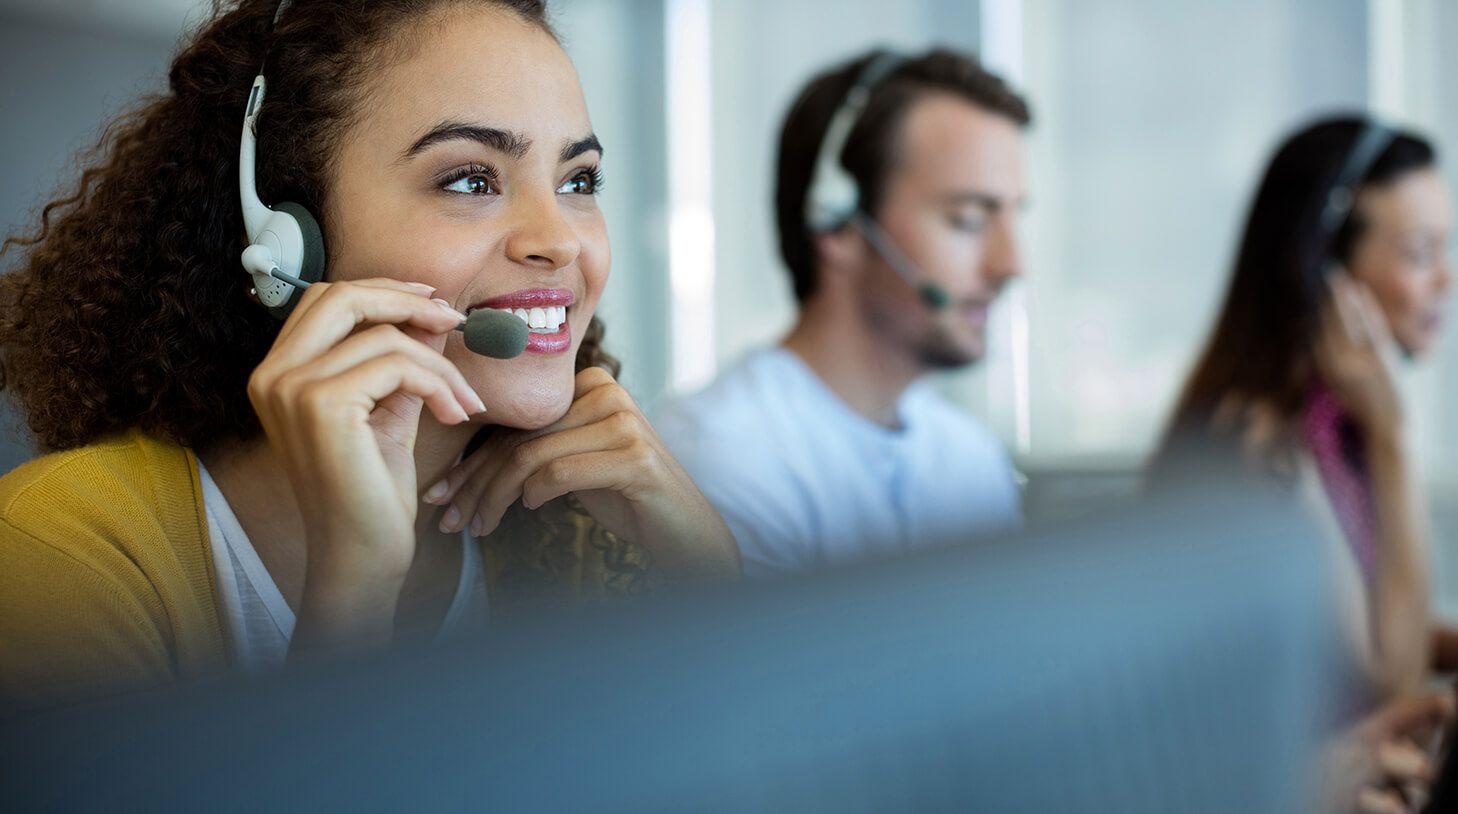 tech support teams and the Call Centre industry